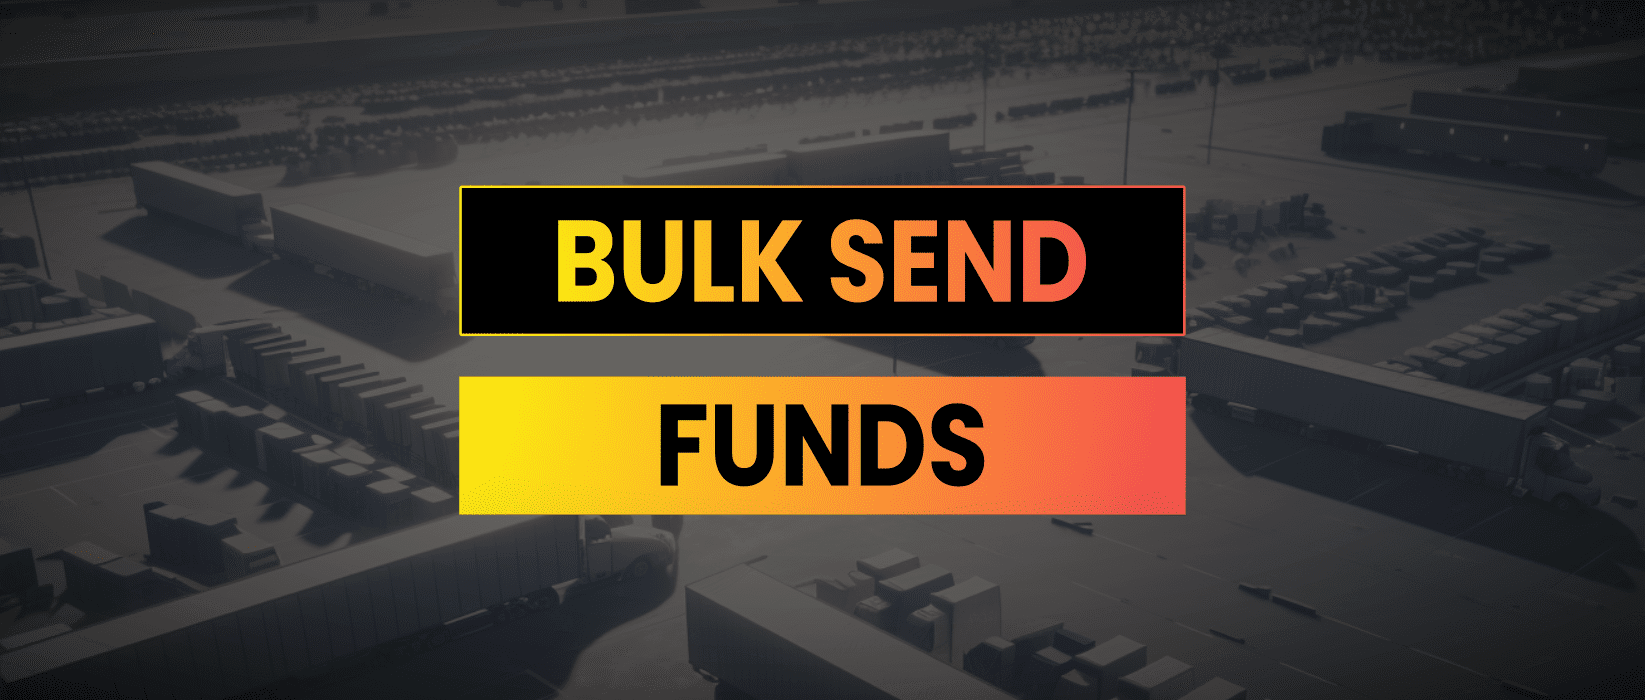 Bulk Send Funds Solidity